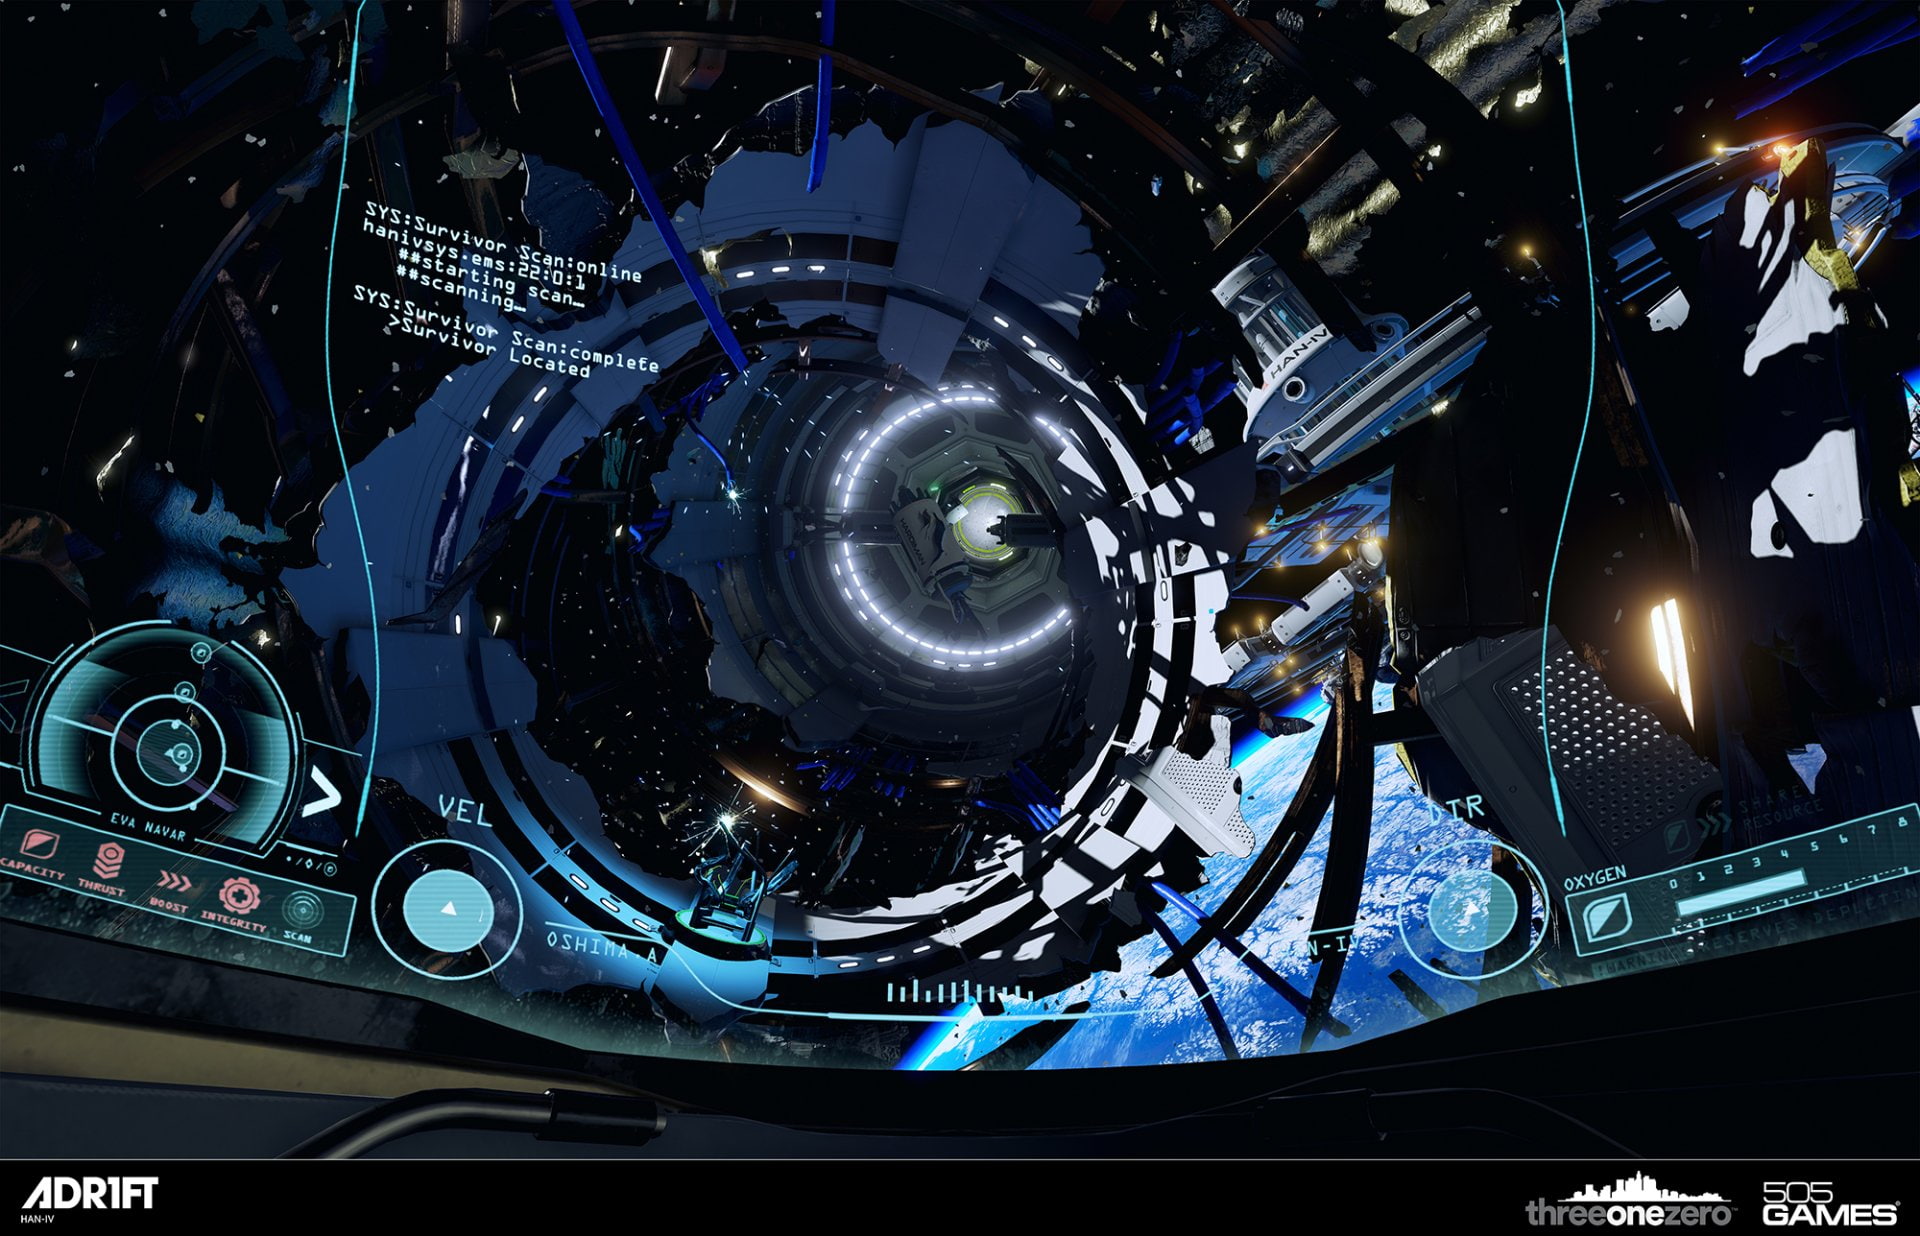 Video Game, ADR1FT